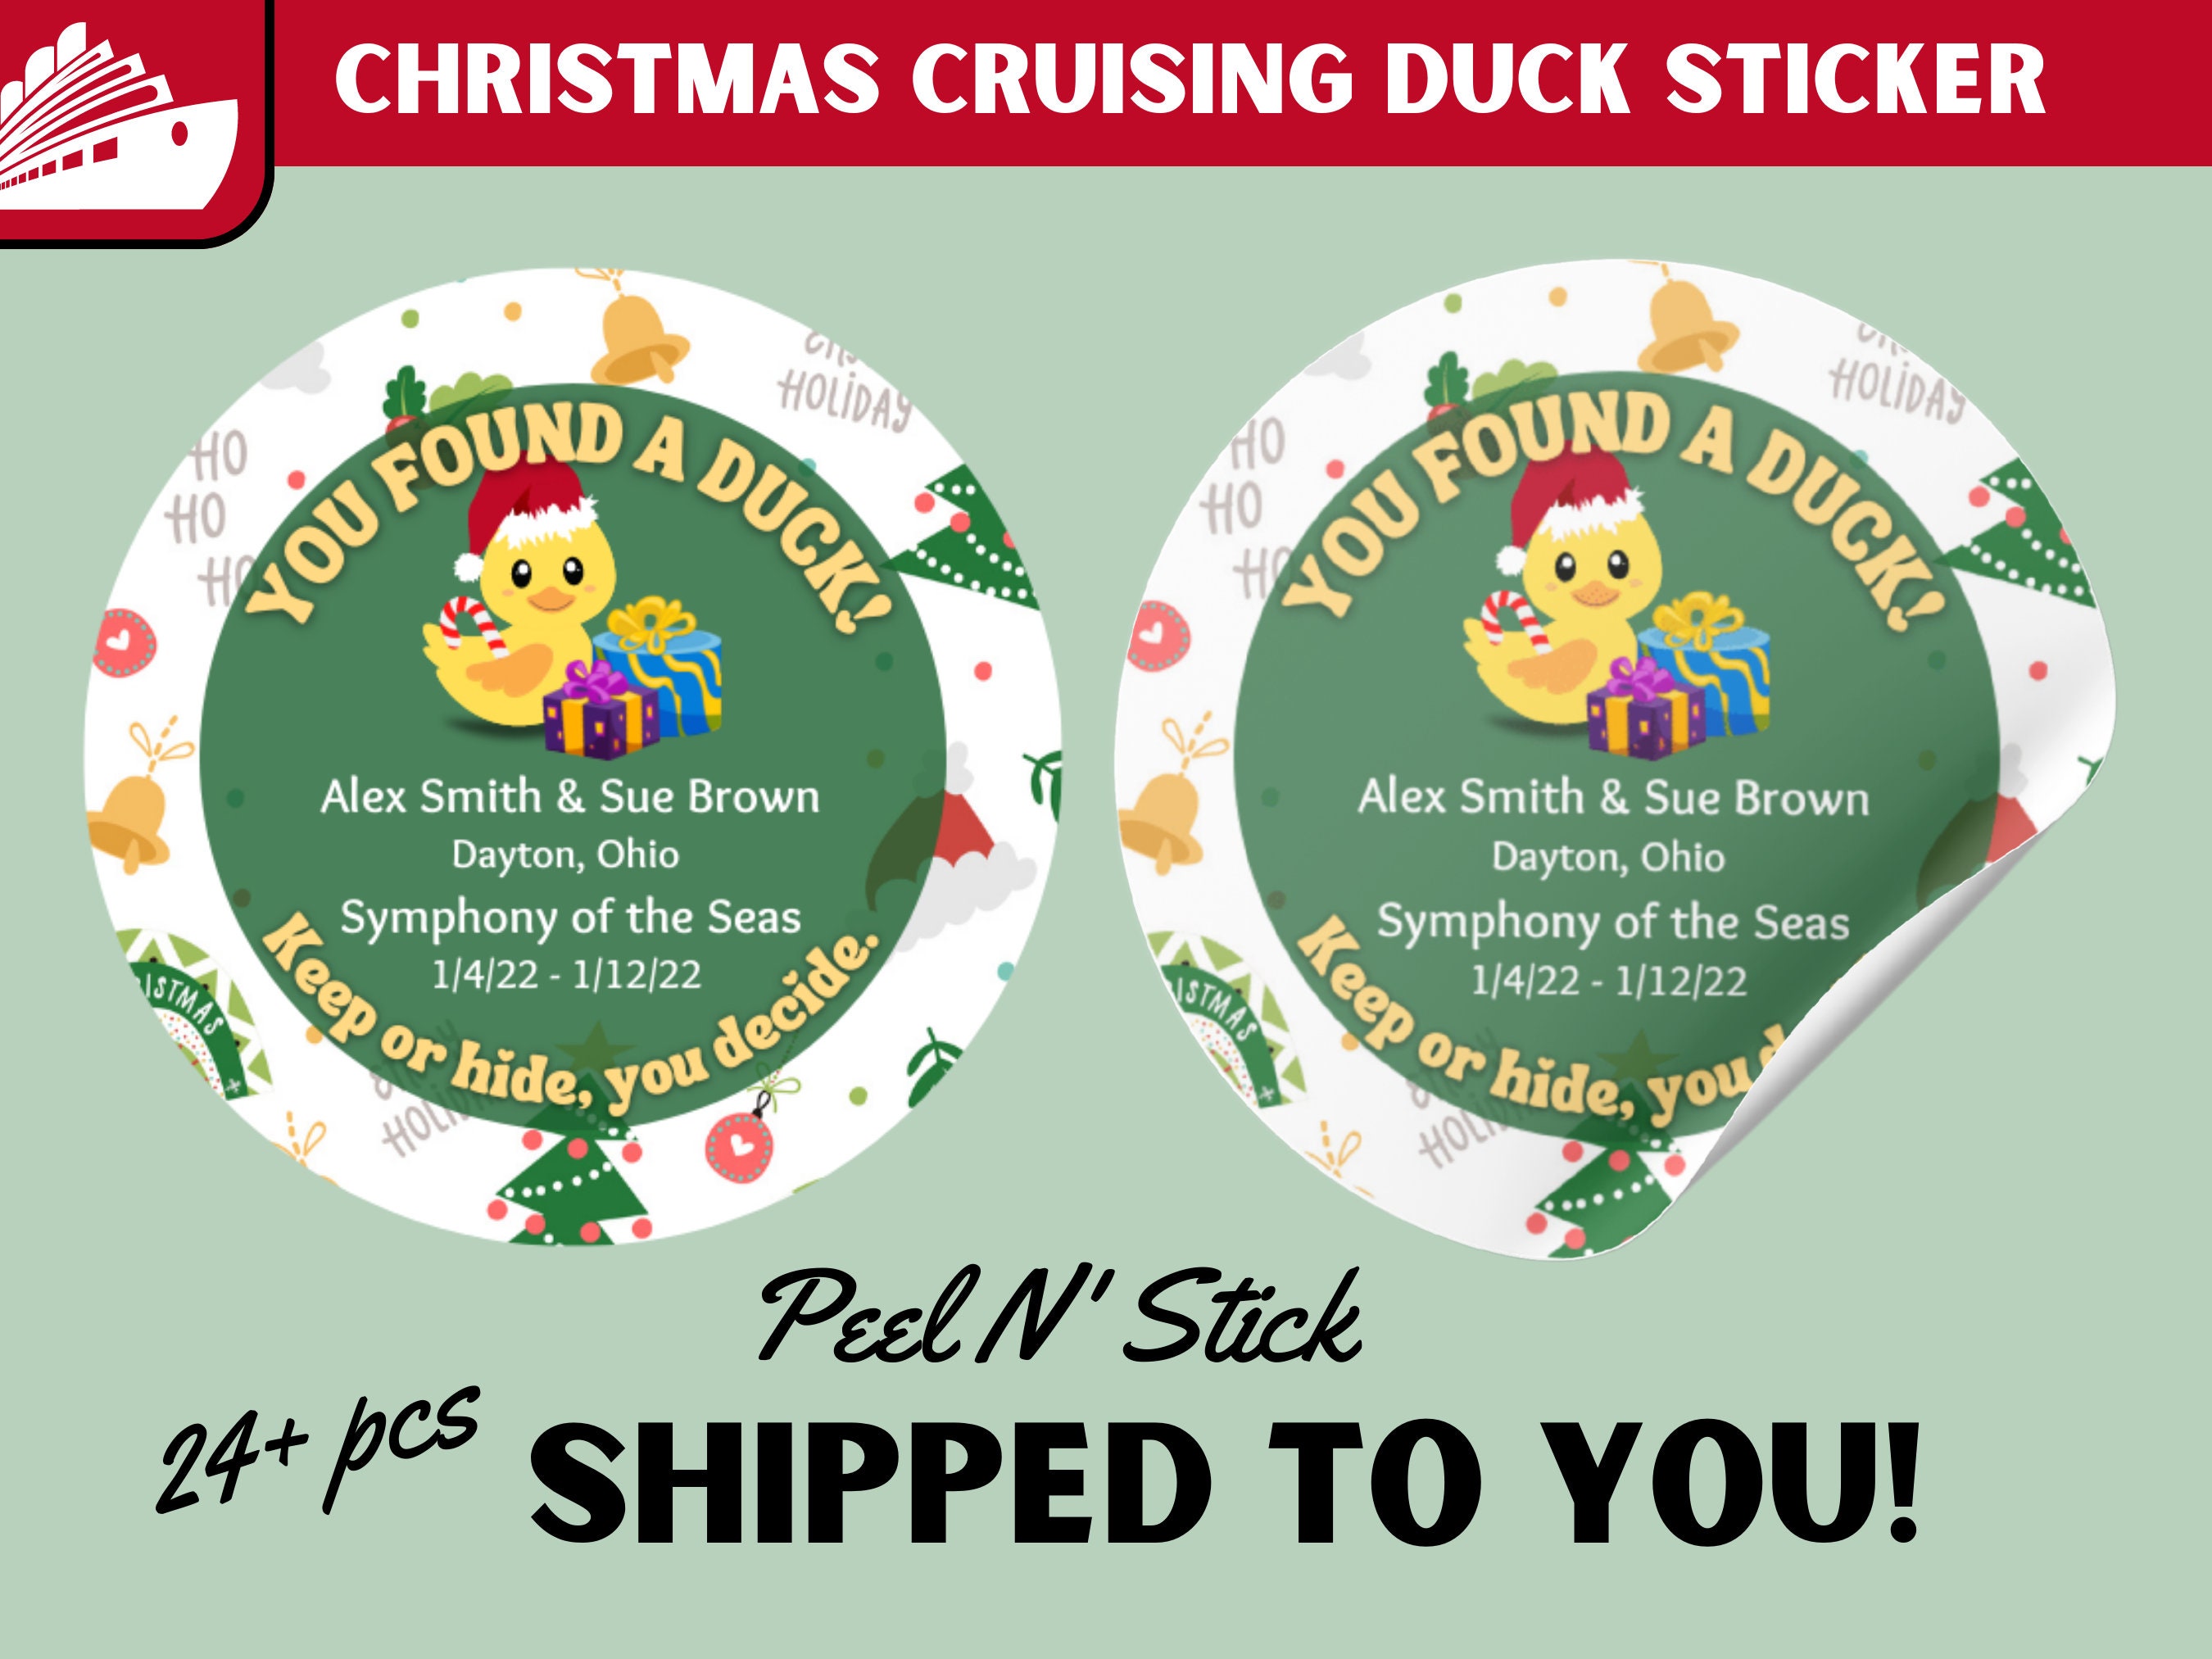 Cruising Ducks for Princess Cruise Boarding Pass Princess Hang Tag with  Rubber Bands | 30 Pack | Tags 2 x 3.5 inches Size to Attach to Sailor  Rubber